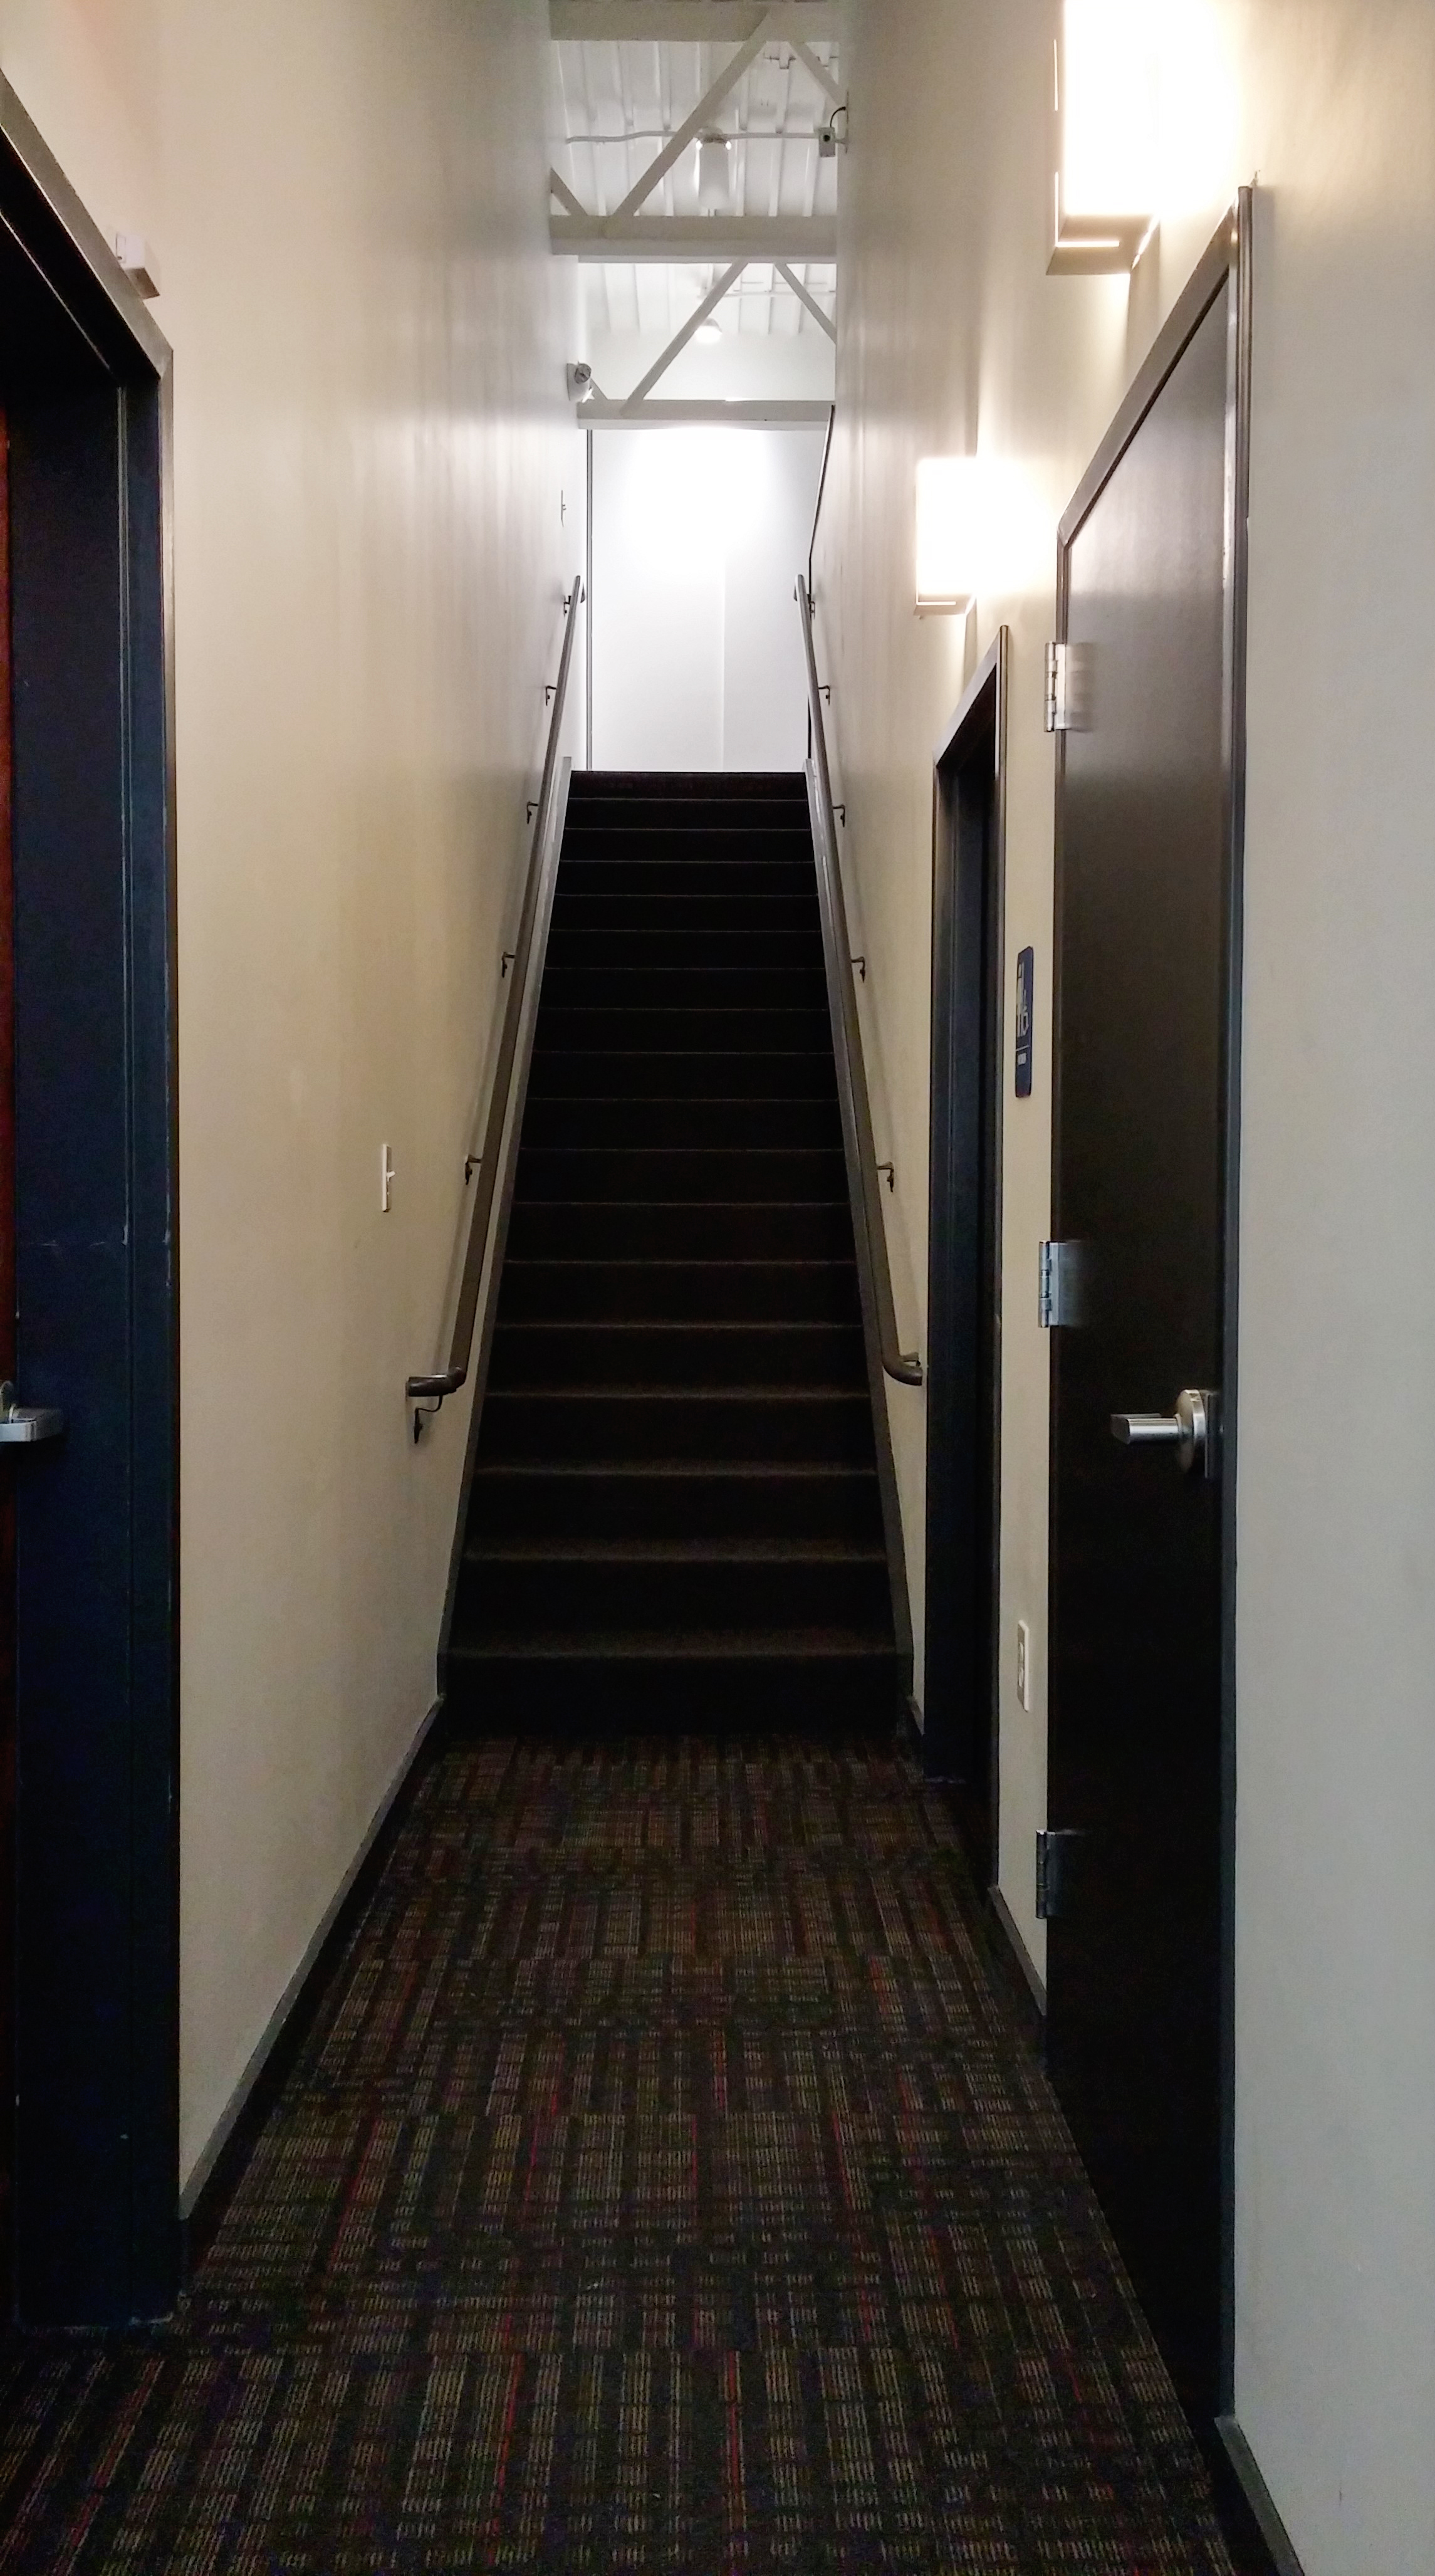 Utility corridor and access stair to Mezzanine above